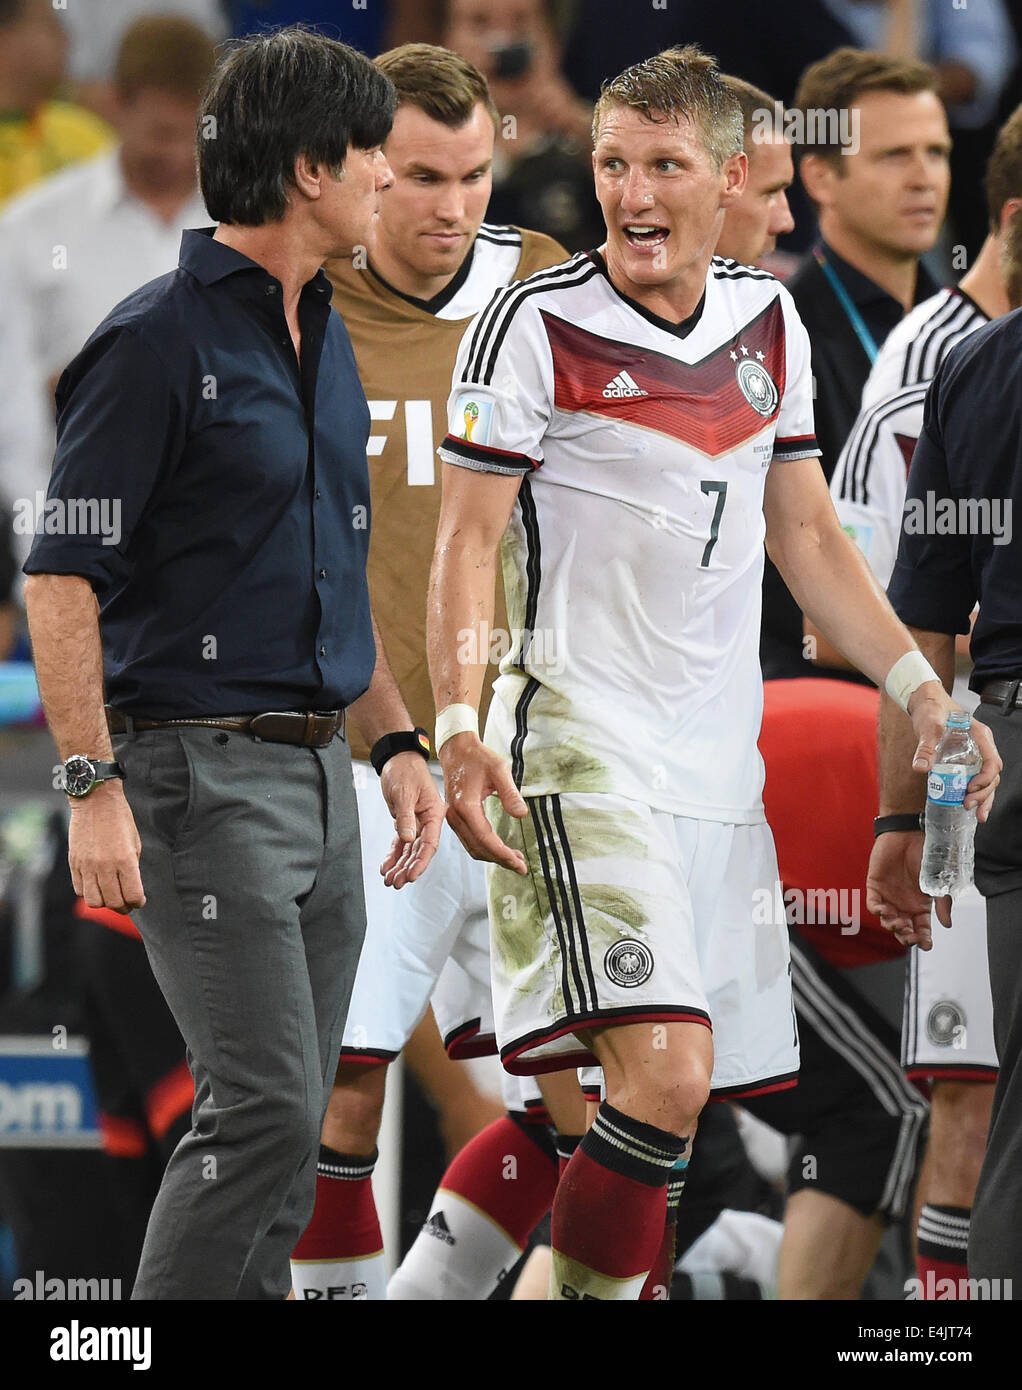 Rio de Janeiro, Brazil. 13th July, 2014. Headcoach Joachim Loew (L) listens to Bastian Schweinsteiger of Germany in a break prior to the overtime during the FIFA World Cup 2014 final soccer match between Germany and Argentina at the Estadio do Maracana in Rio de Janeiro, Brazil, 13 July 2014. Photo: Marcus Brandt/dpa/Alamy Live News Stock Photo